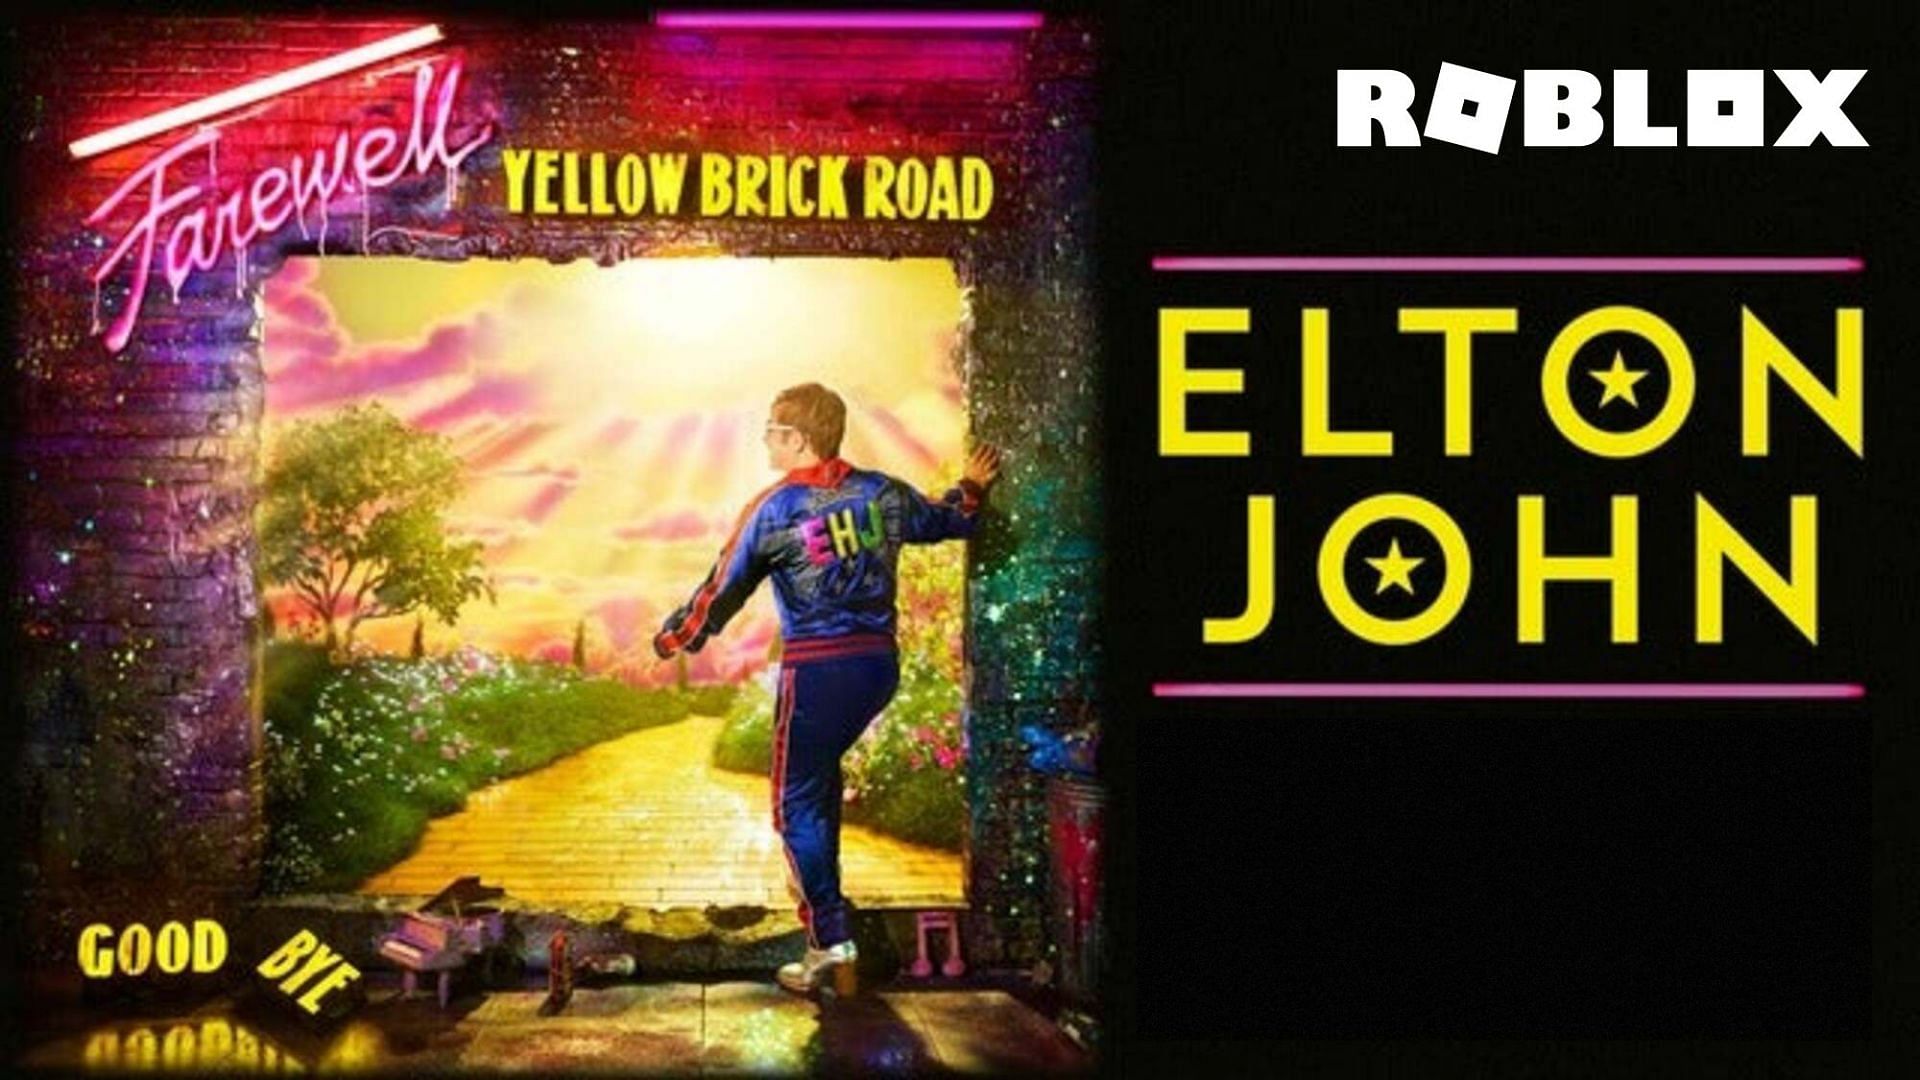 Elton John is very excited and thrilled to join Roblox (Image via Facebook Inc.)